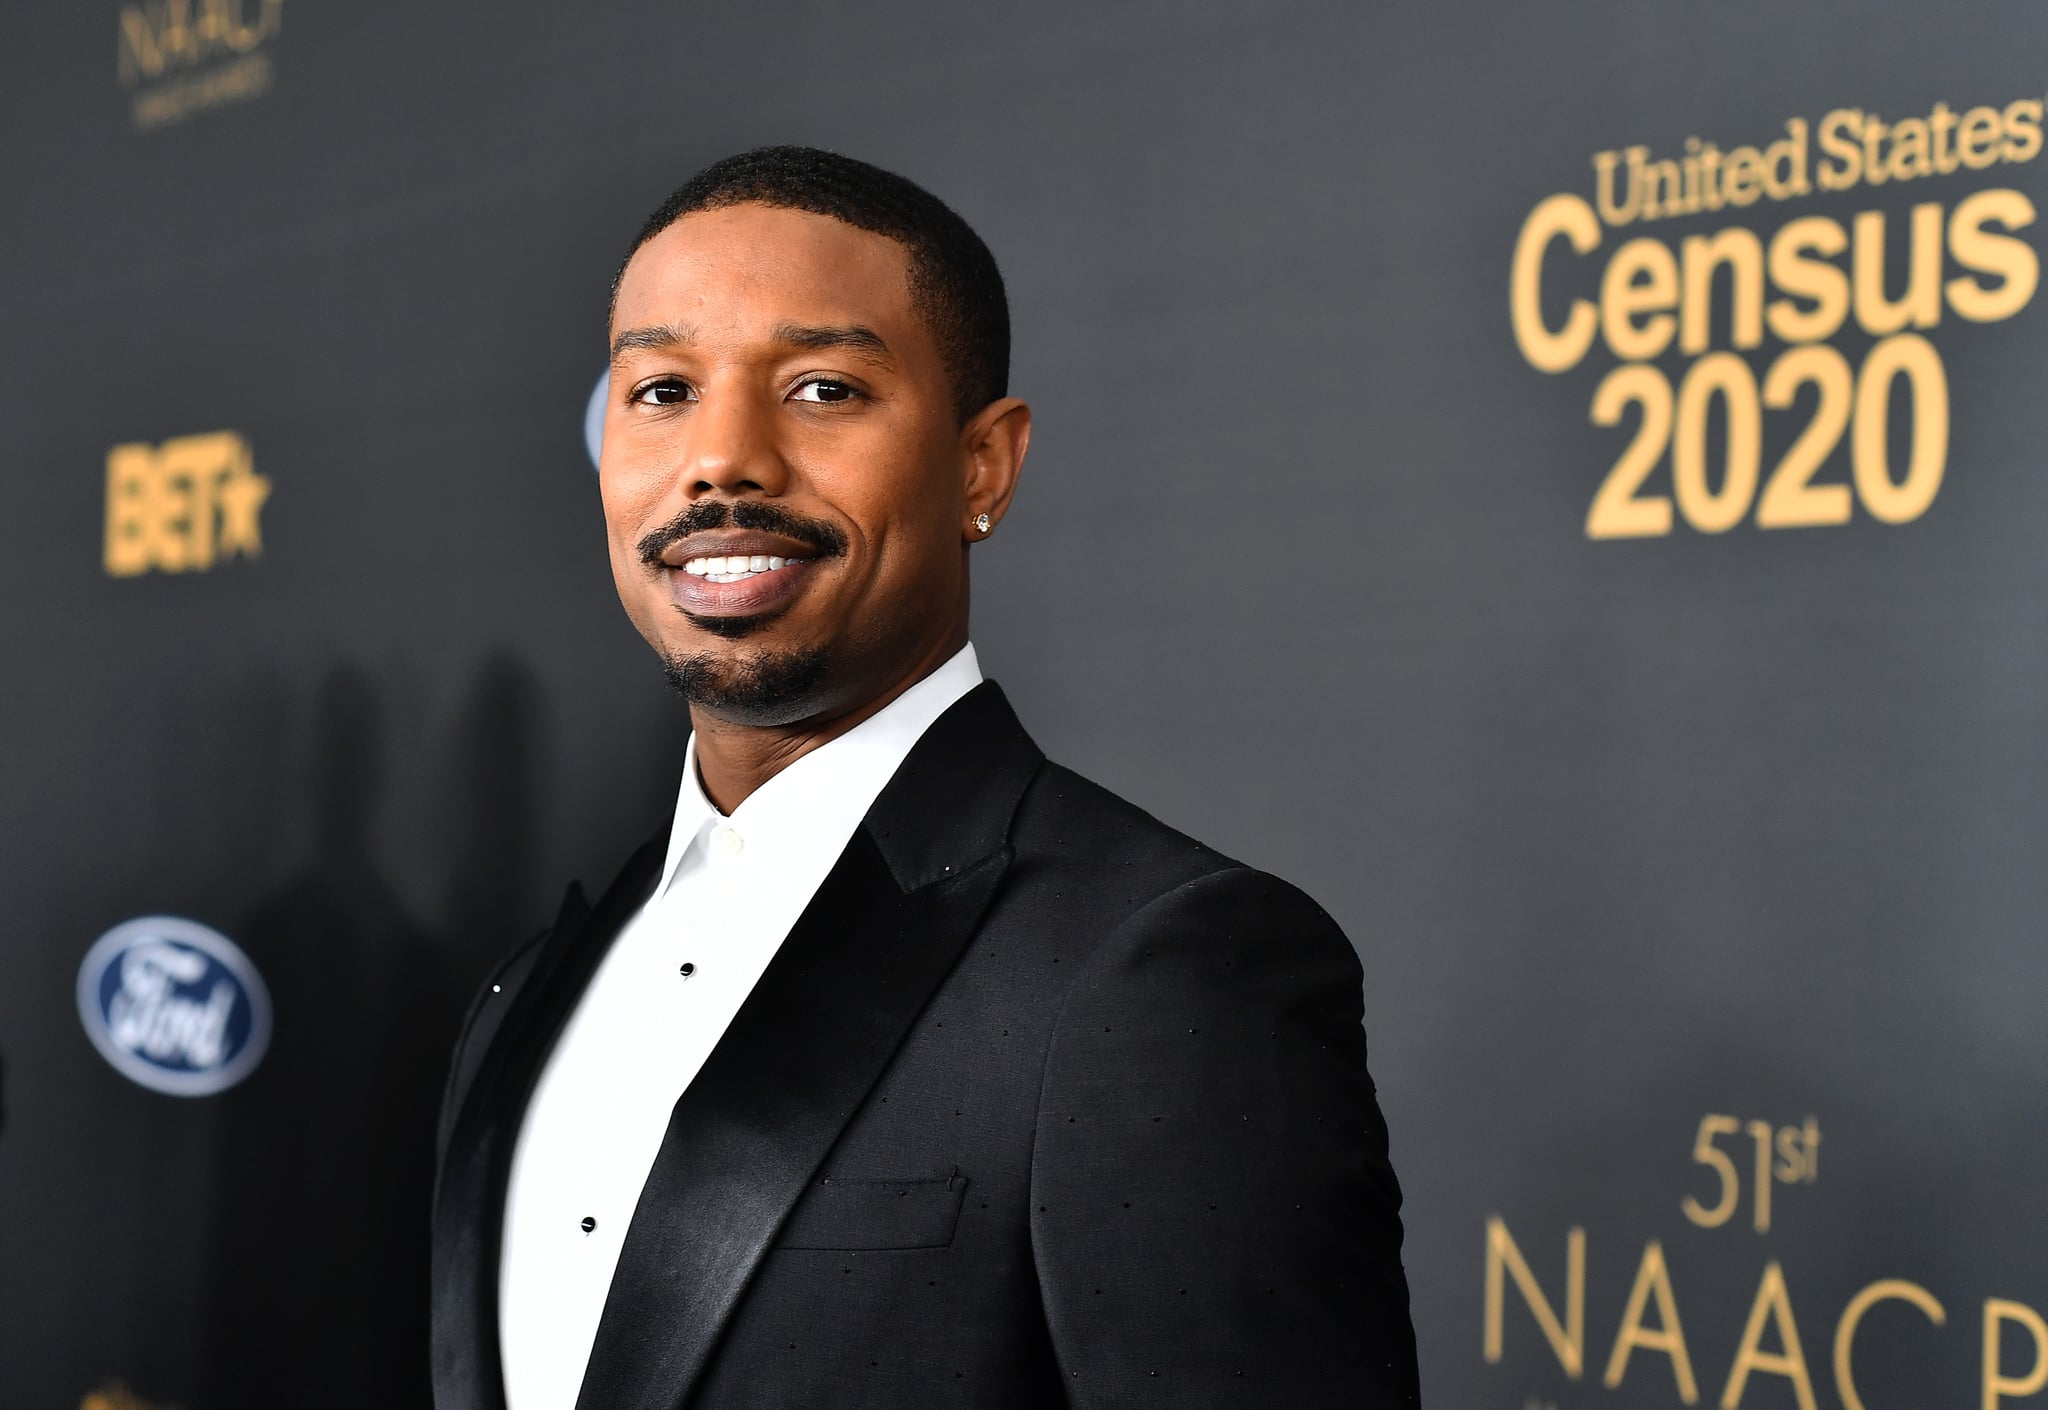 PASADENA, CALIFORNIA - FEBRUARY 22: Michael B. Jordan attends the 51st NAACP Image Awards, Presented by BET, at Pasadena Civic Auditorium on February 22, 2020 in Pasadena, California. (Photo by Paras Griffin/Getty Images for BET)